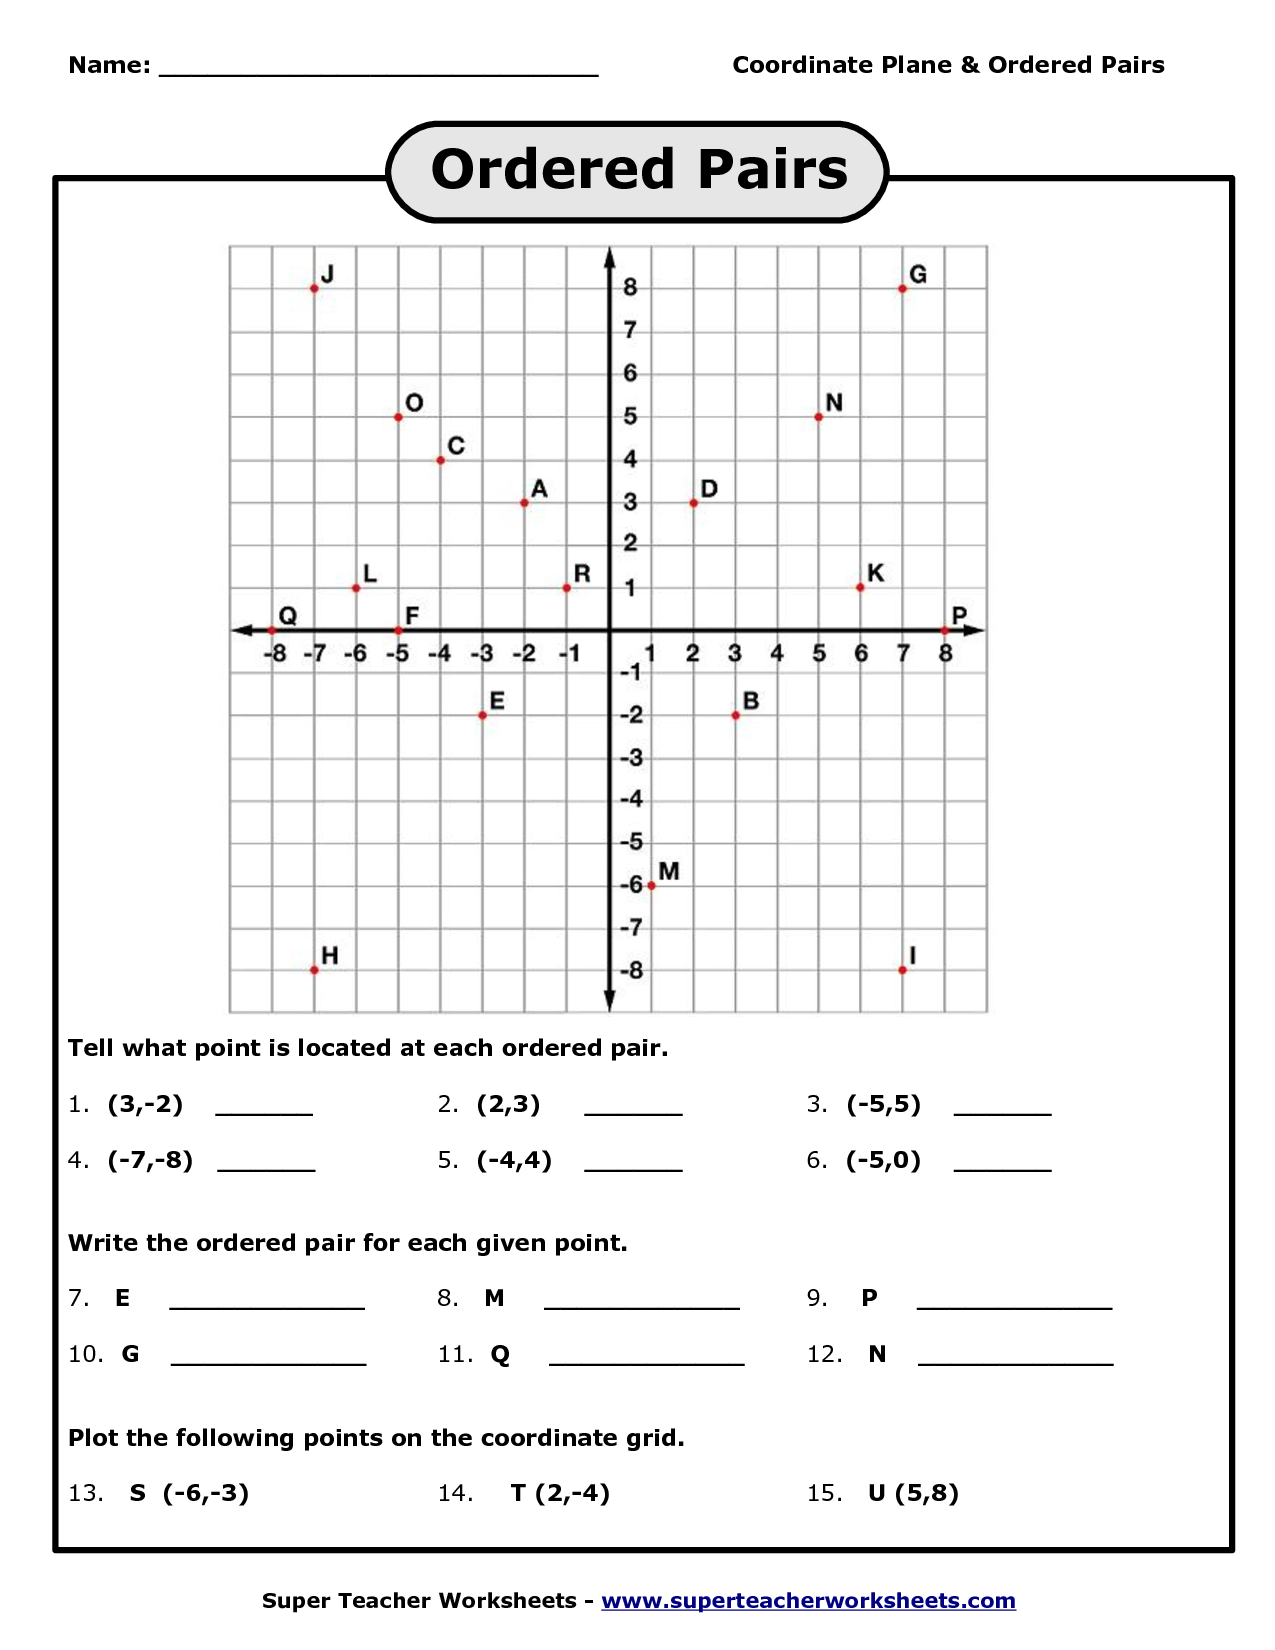 Coordinate plane mystery picture worksheets free